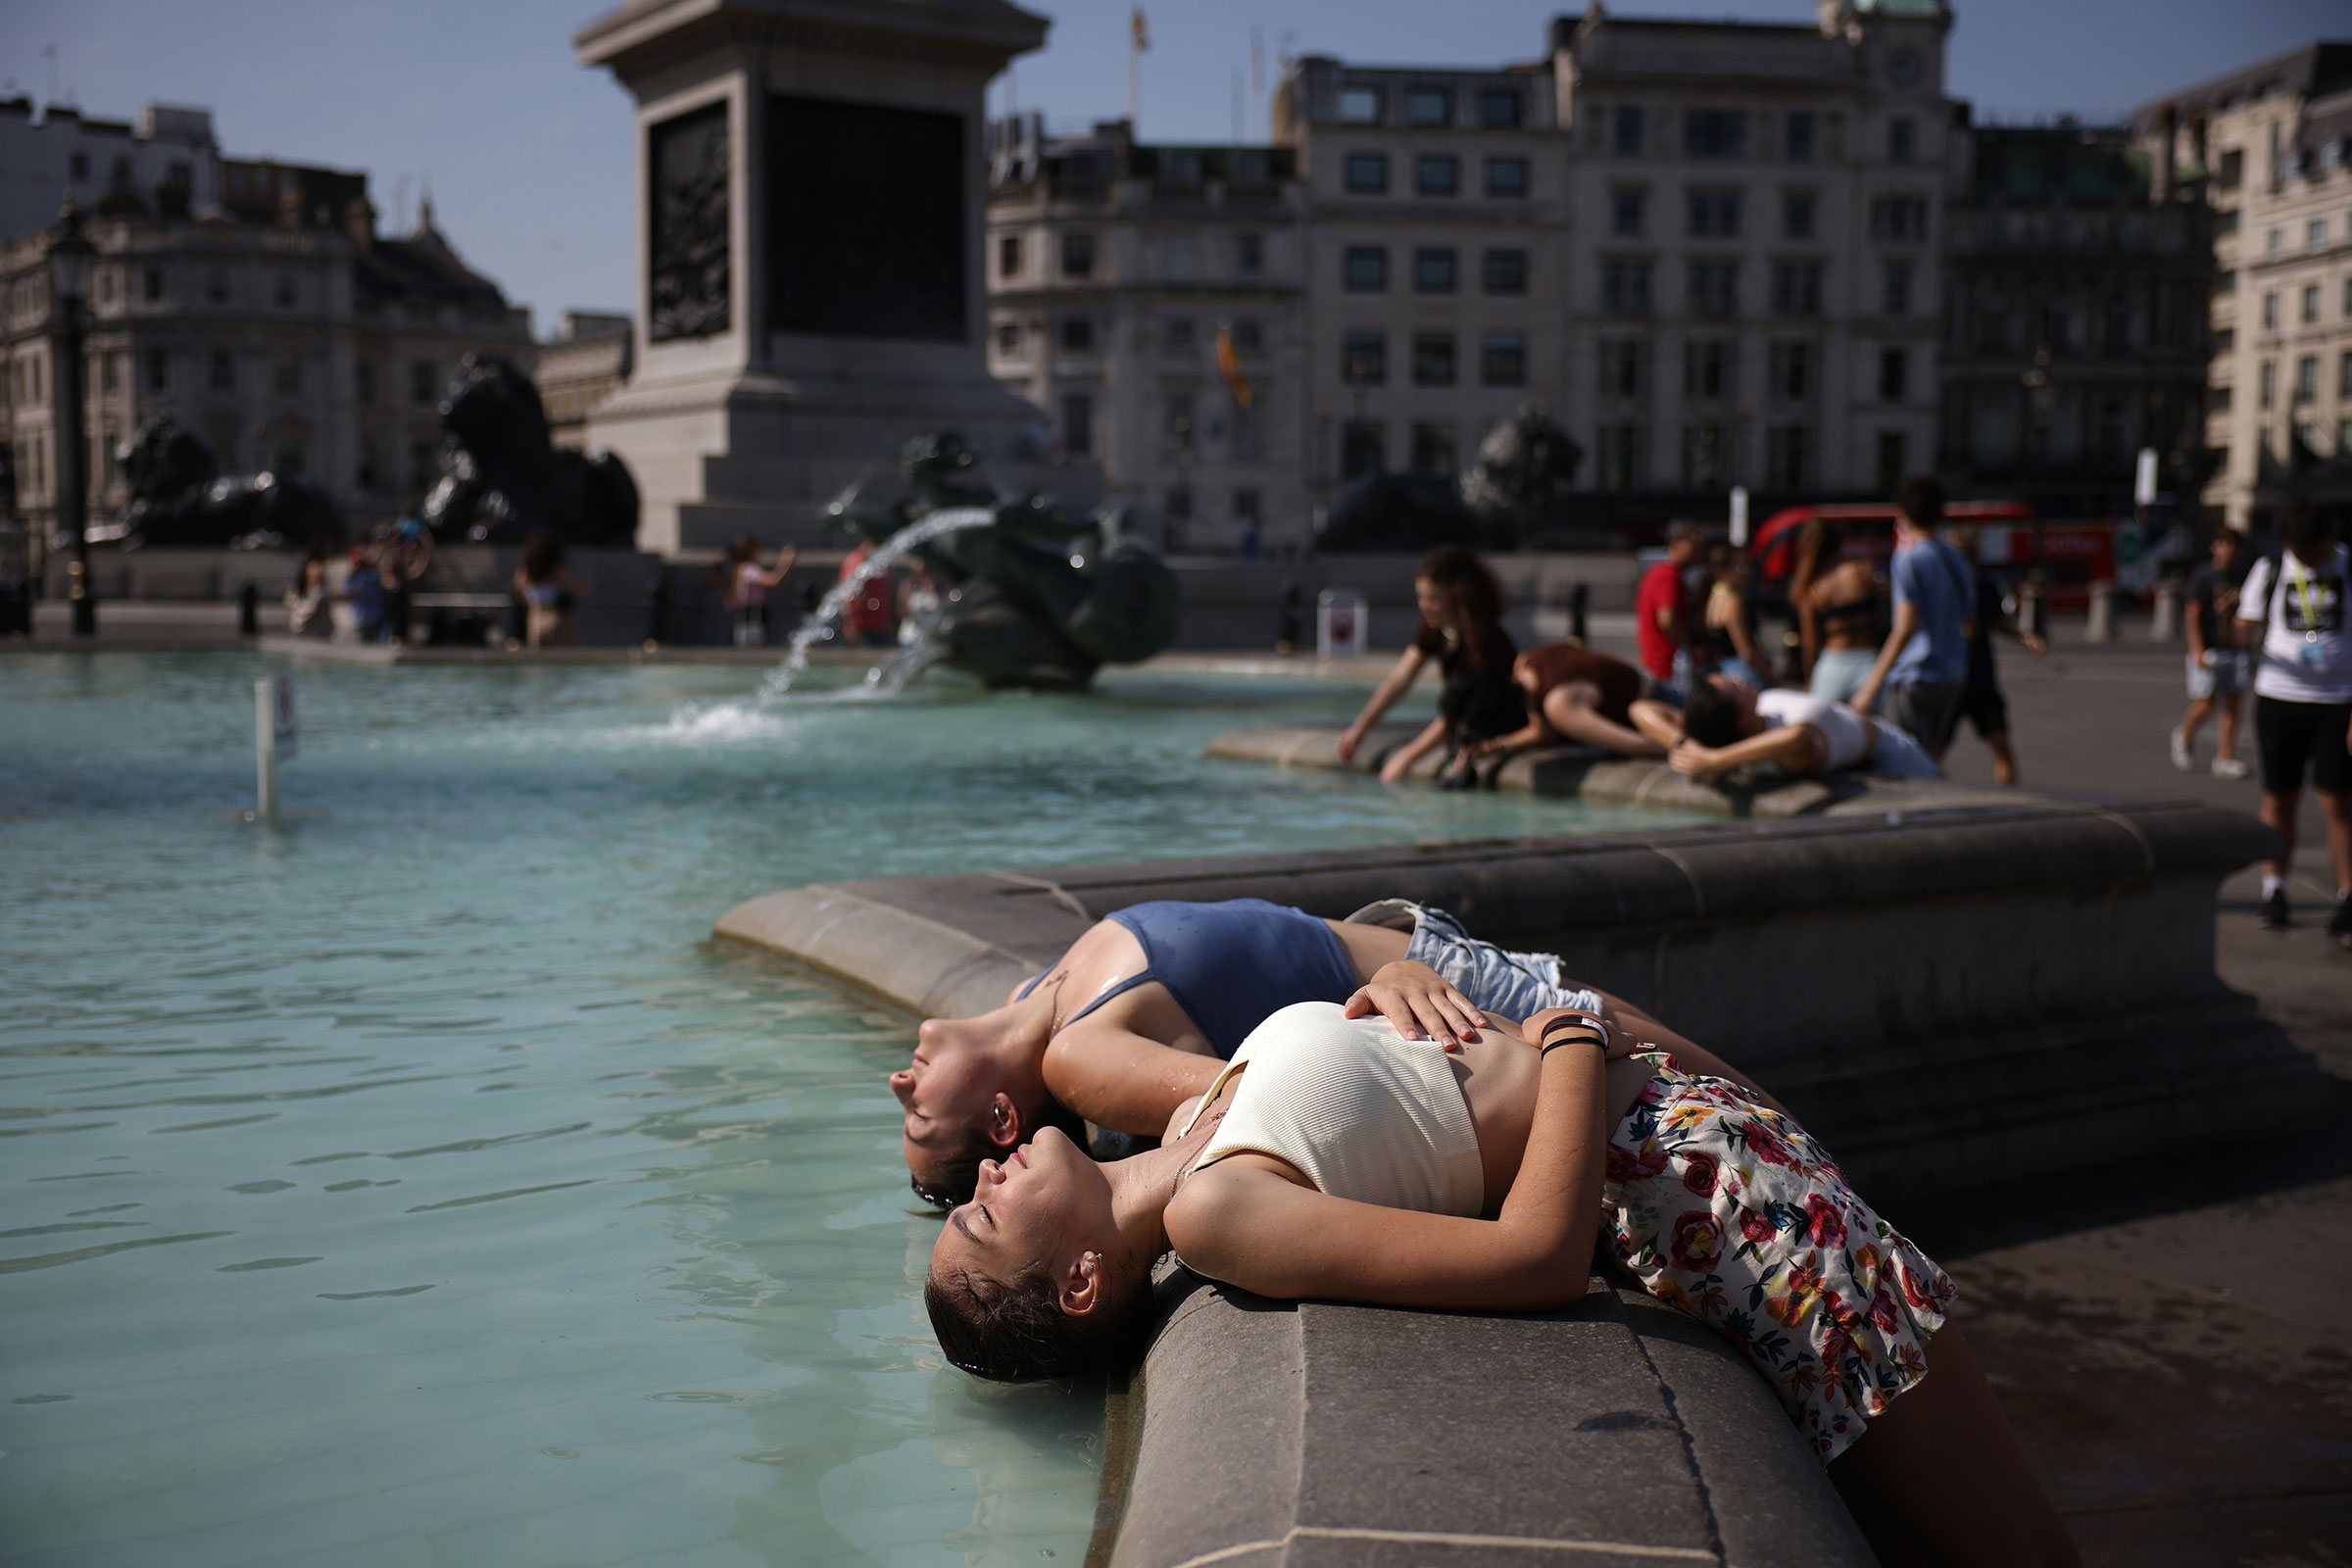 Two women dip their heads into the fountain to cool off in Trafalgar Square in London on July 19. (Dan Kitwood—Getty Images)